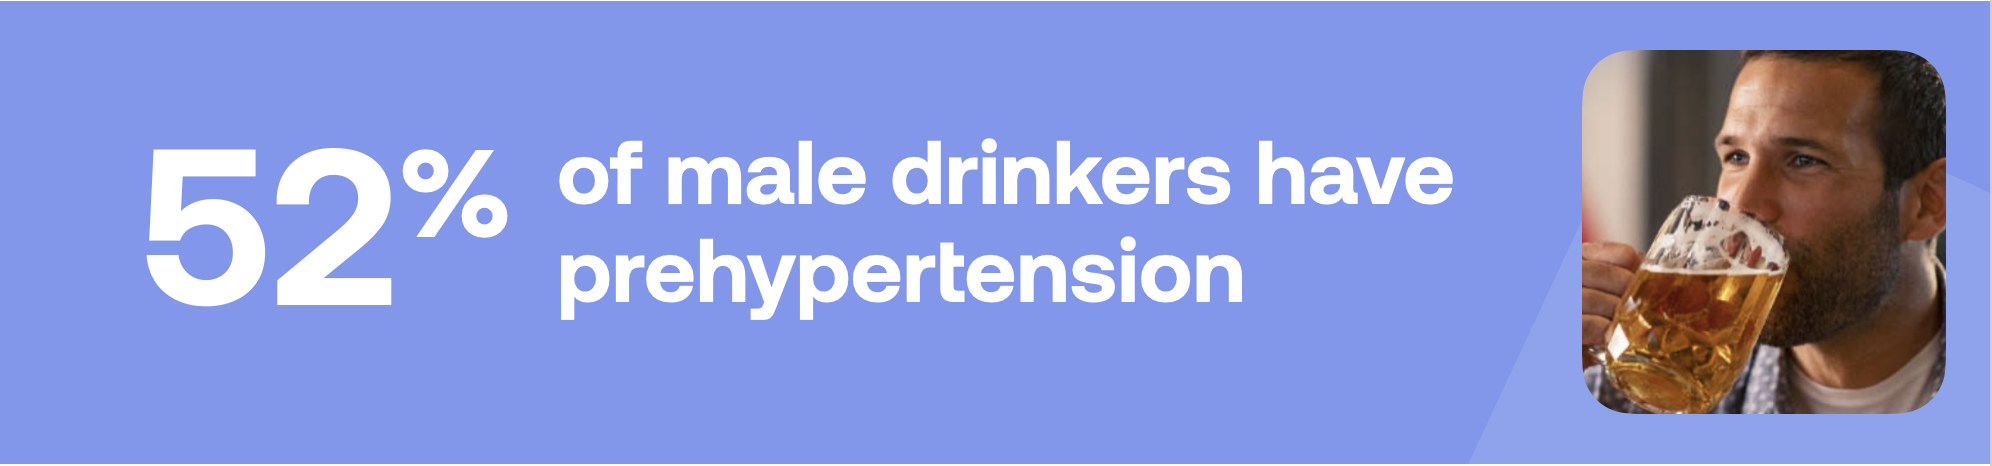 52% of male drinkers have prehypertension